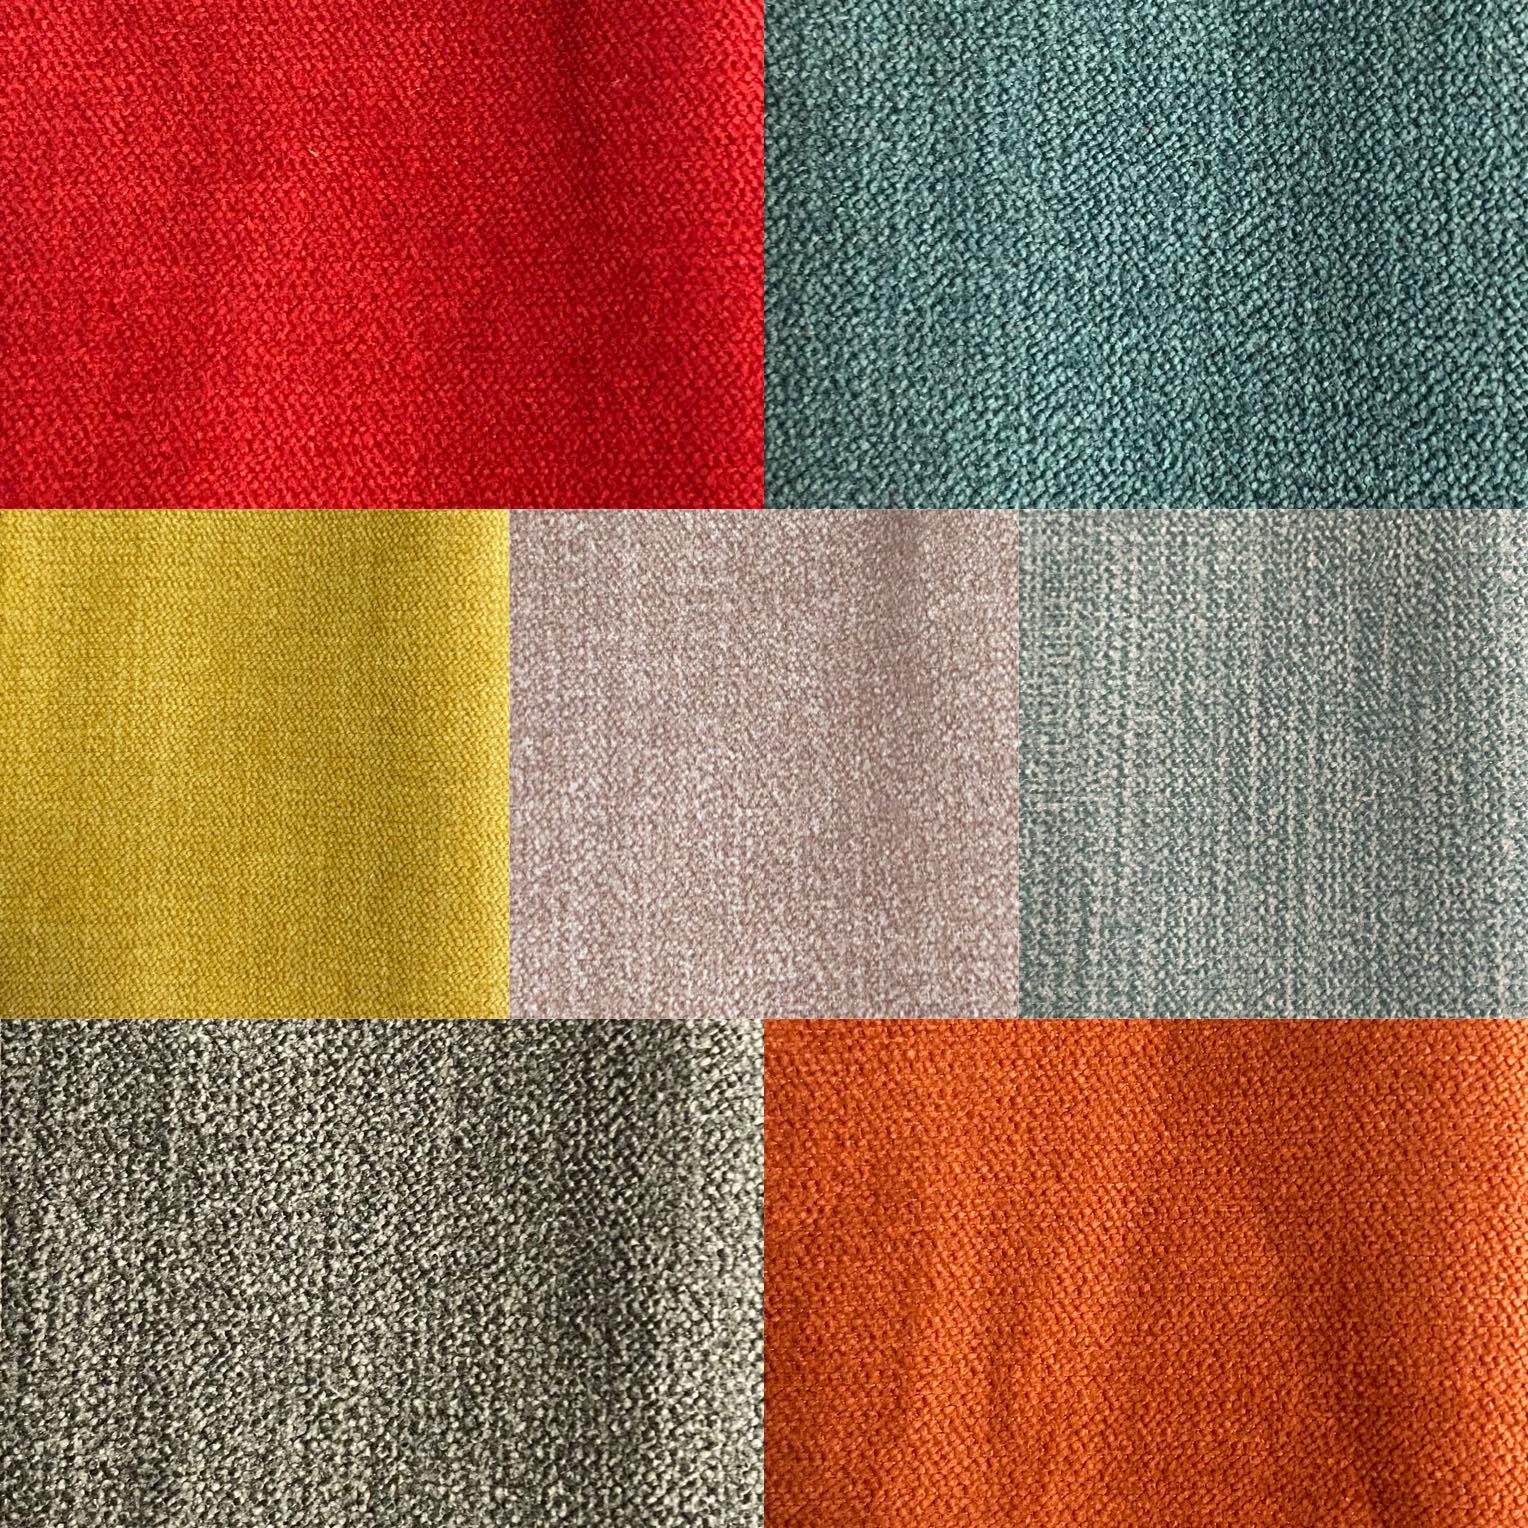 New Furnishing Fabric Chenille Material In Orange Perfect For Sofas Curtains 